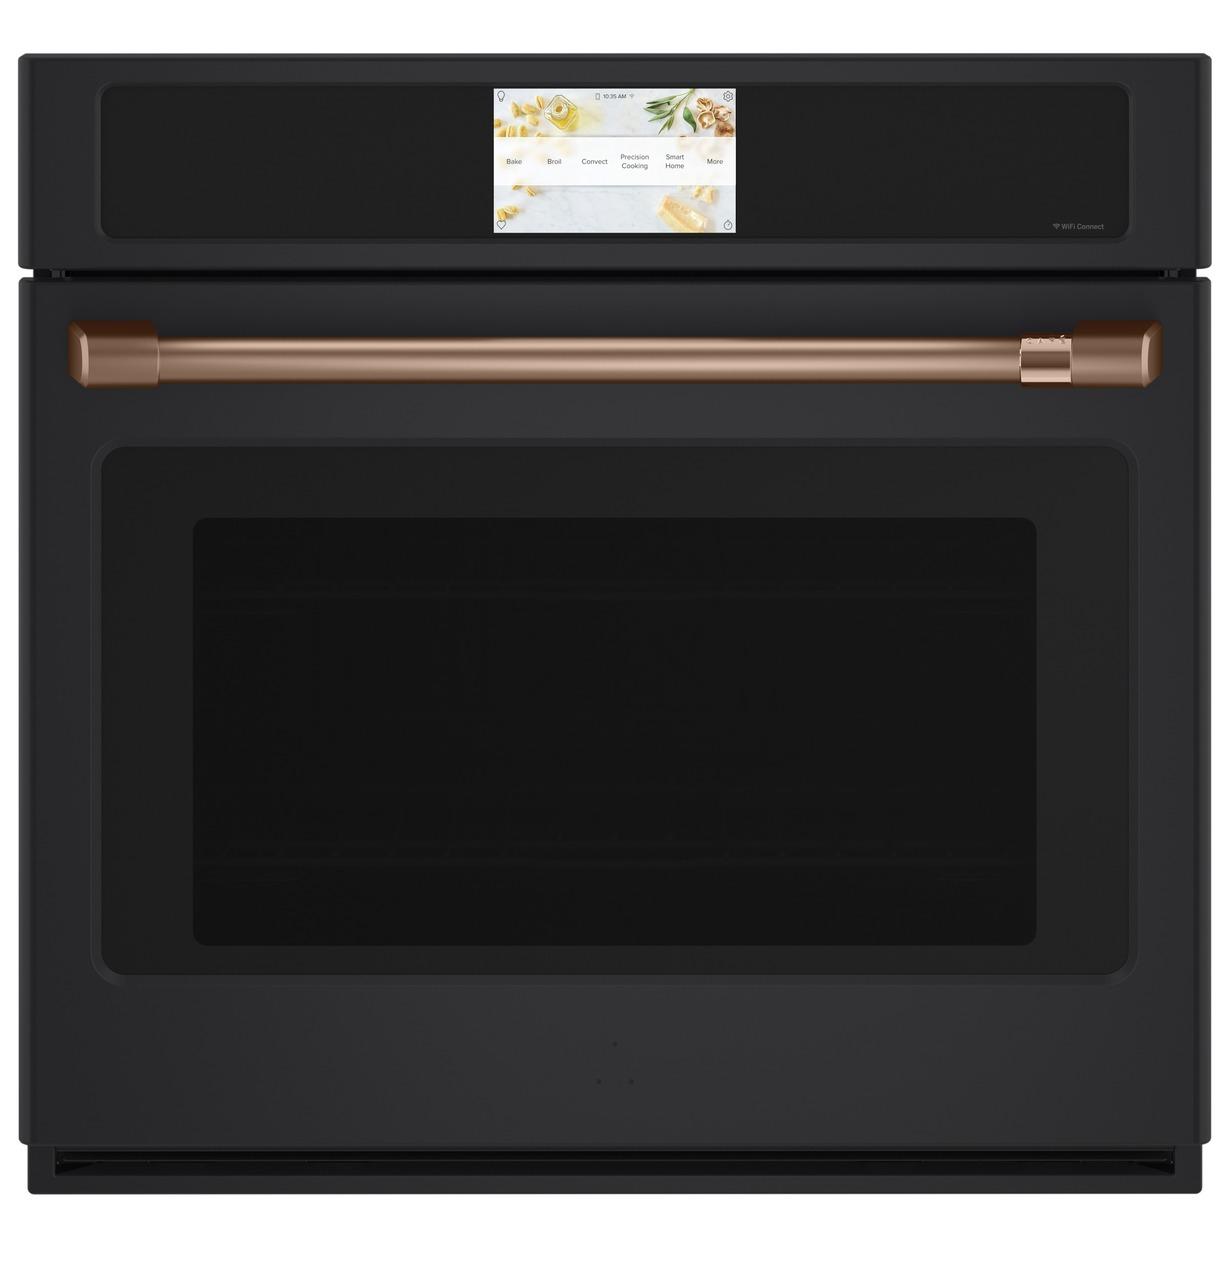 Cafe Caf(eback)™ Professional Series 30" Smart Built-In Convection Single Wall Oven